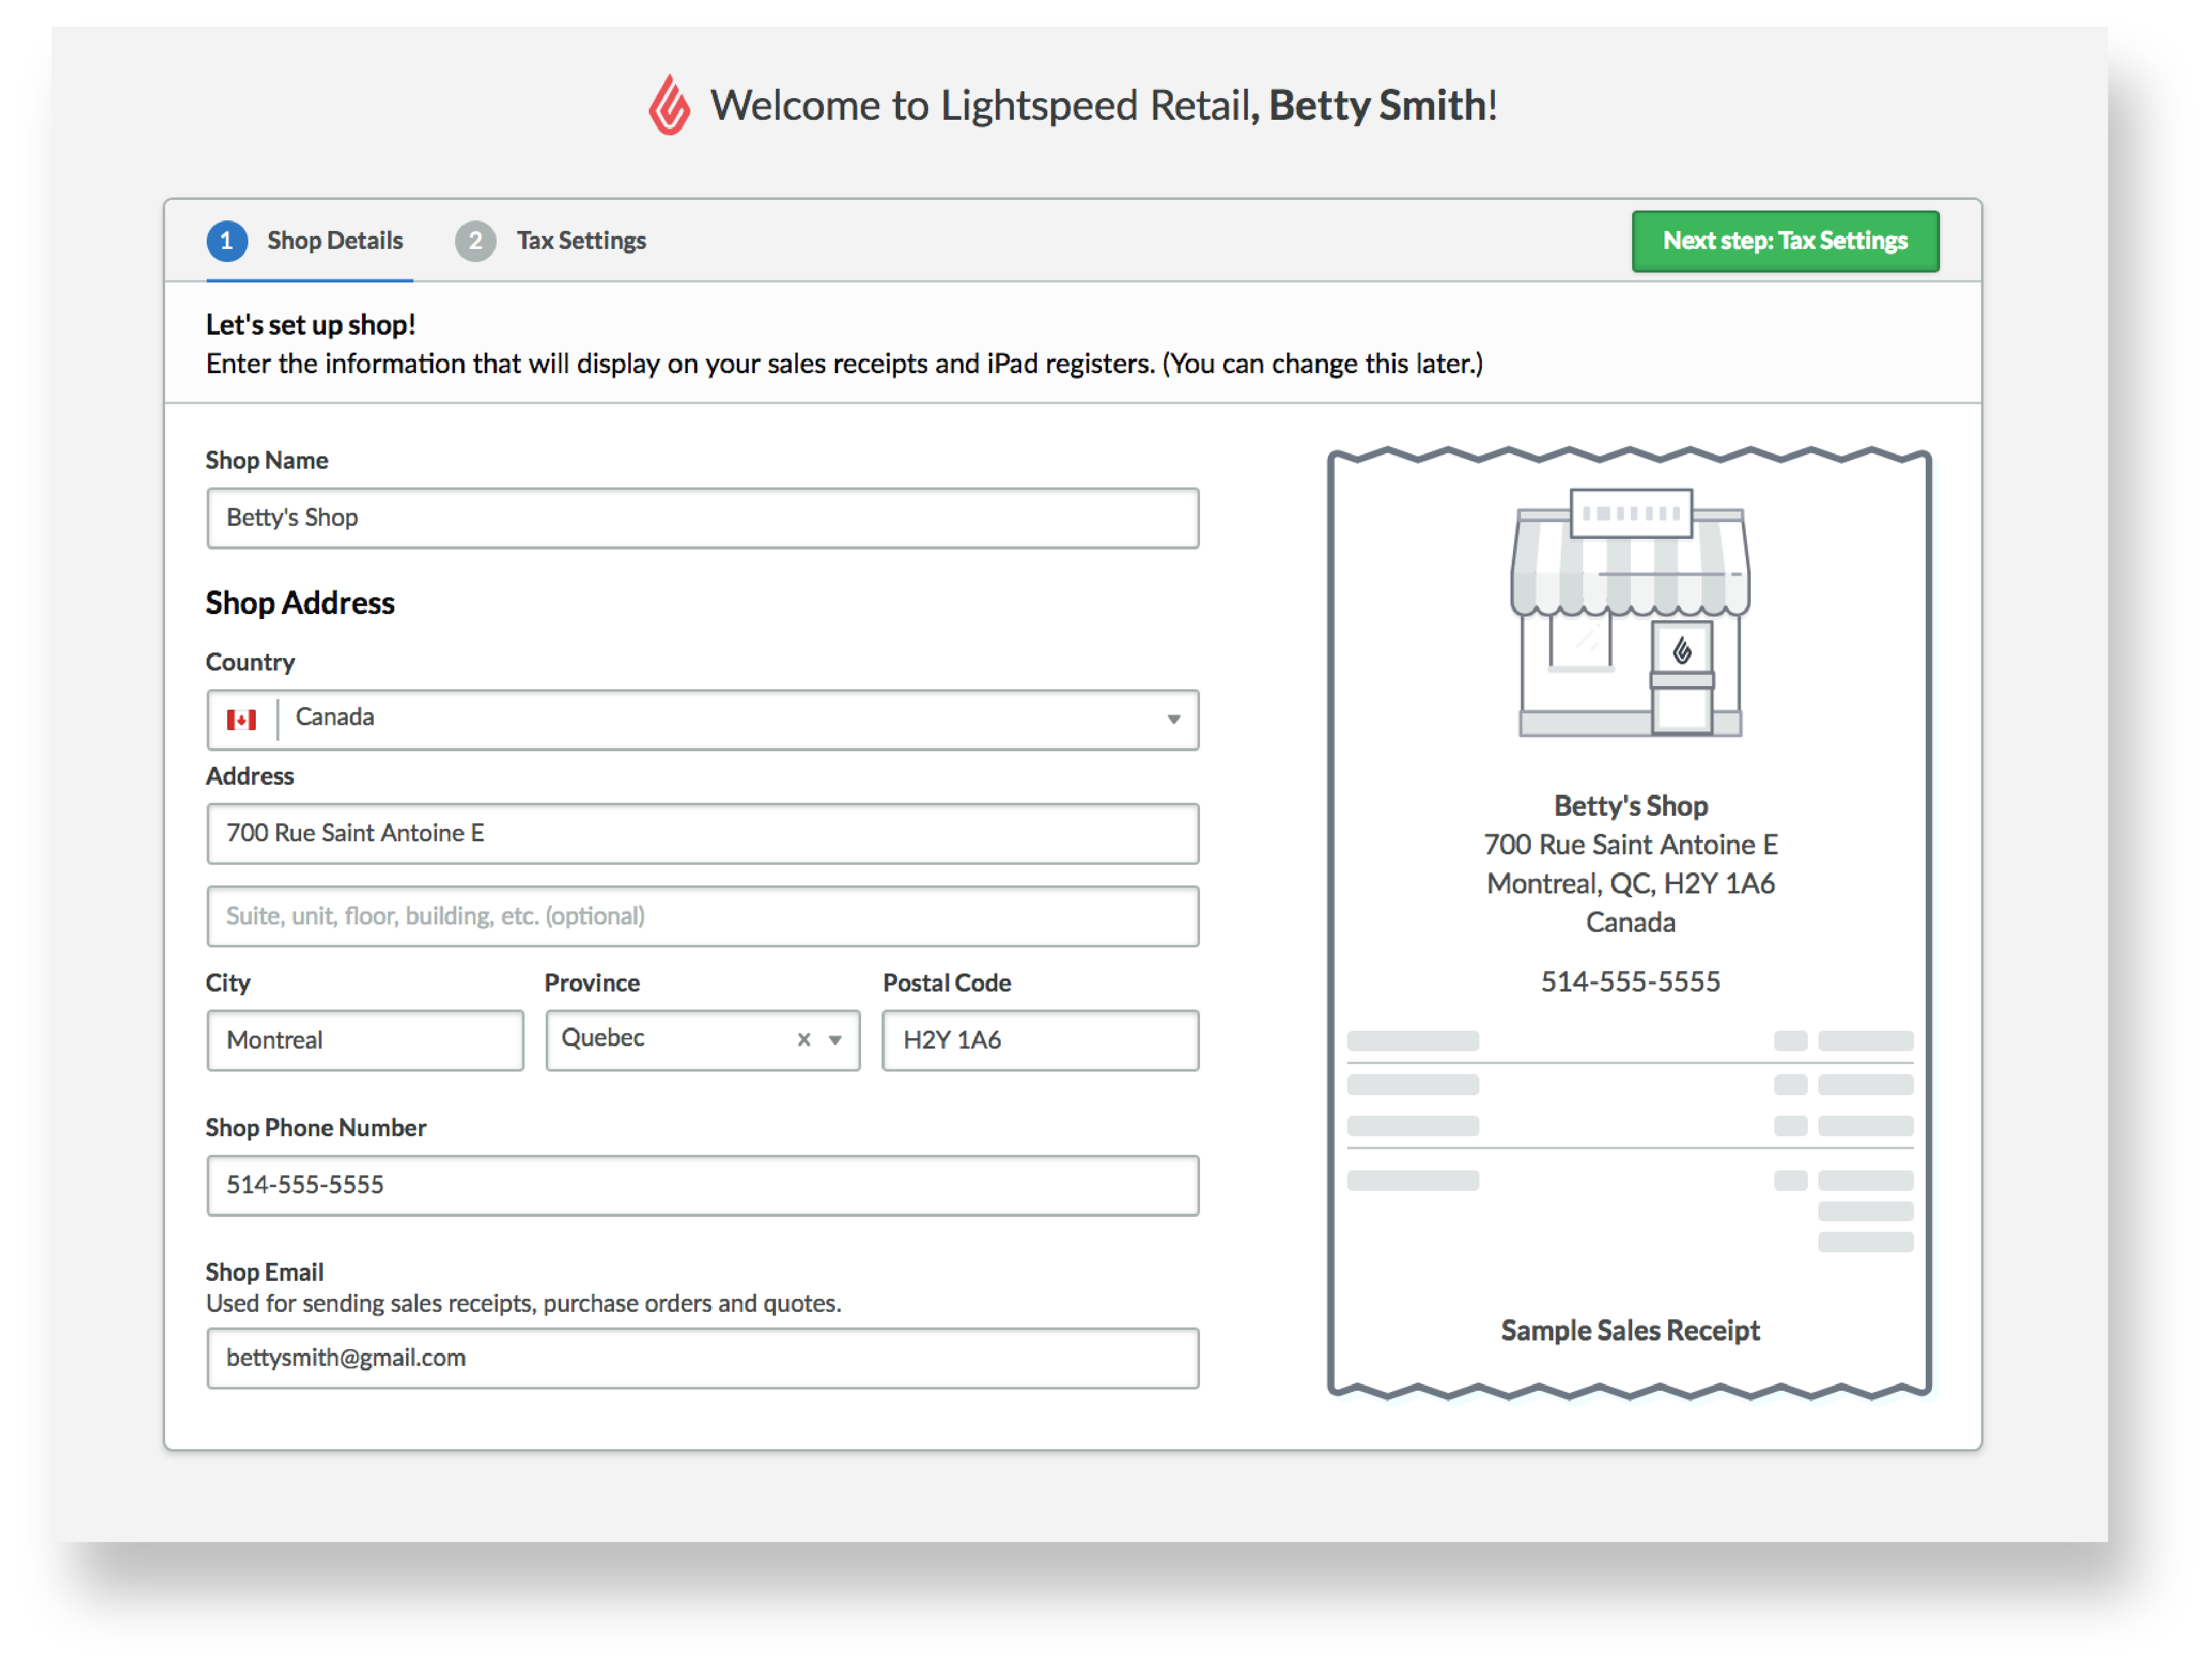 Setup page with fields to fill in shop details and a mock up image of a sample sales receipt.